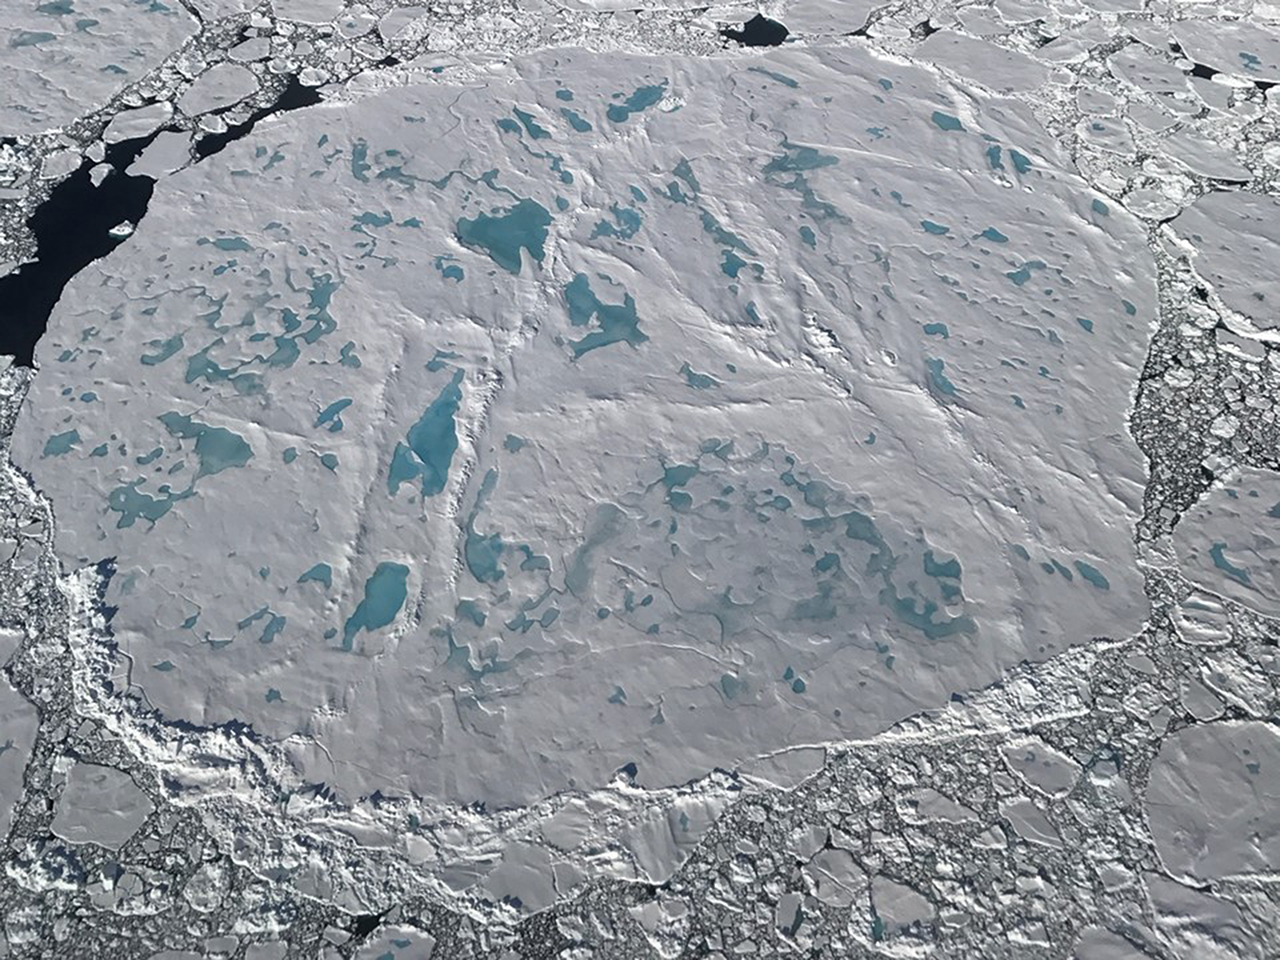 A large circular sea ice floe covered with melt ponds and surrounded by smaller floes, as seen from an Operation IceBridge flight on July 17, 2017.